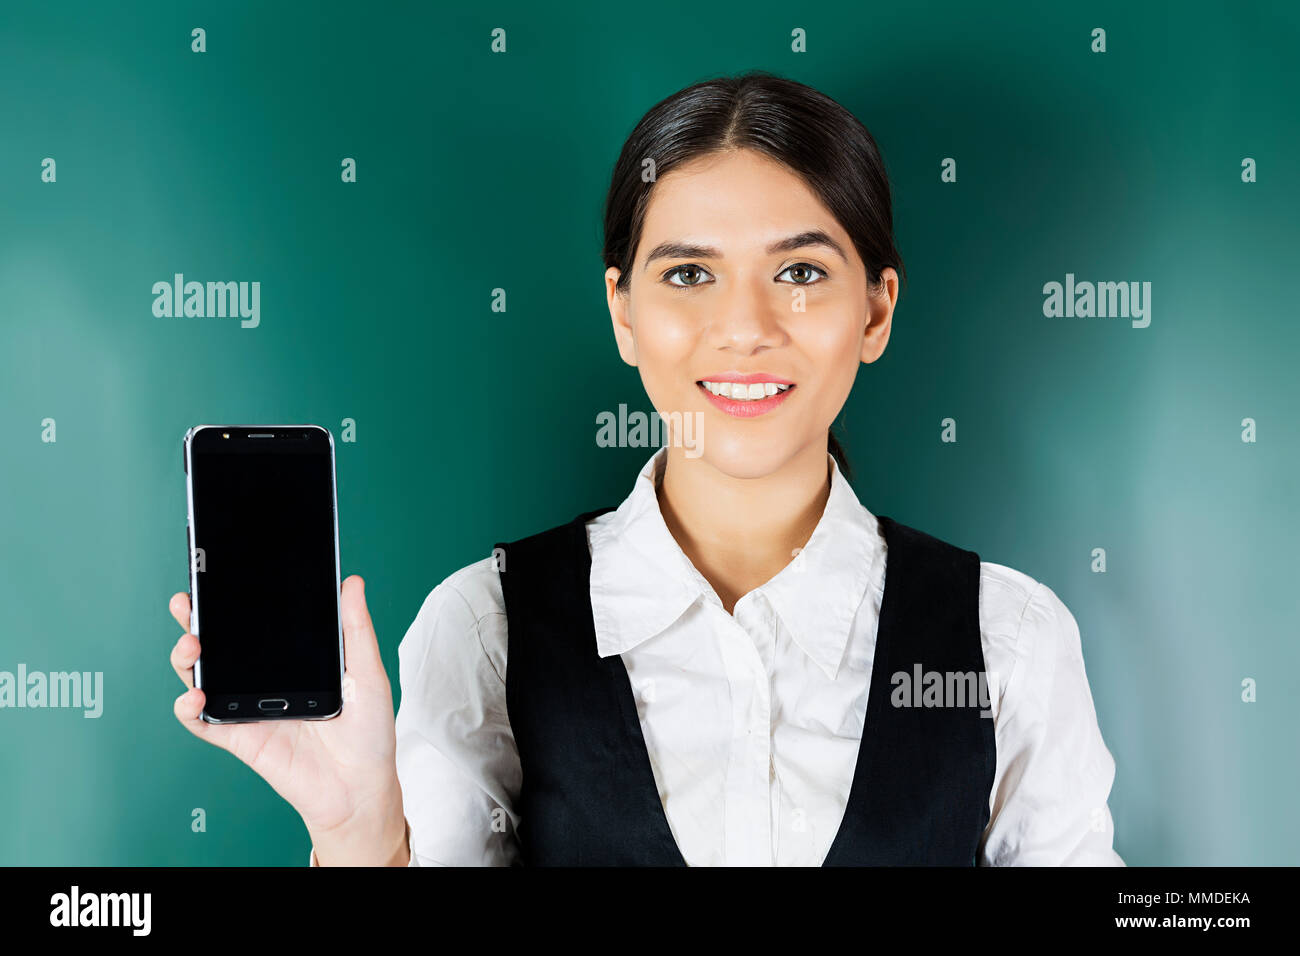 One Young Lady Business Woman Employee Standing On Colored Background Stock Photo